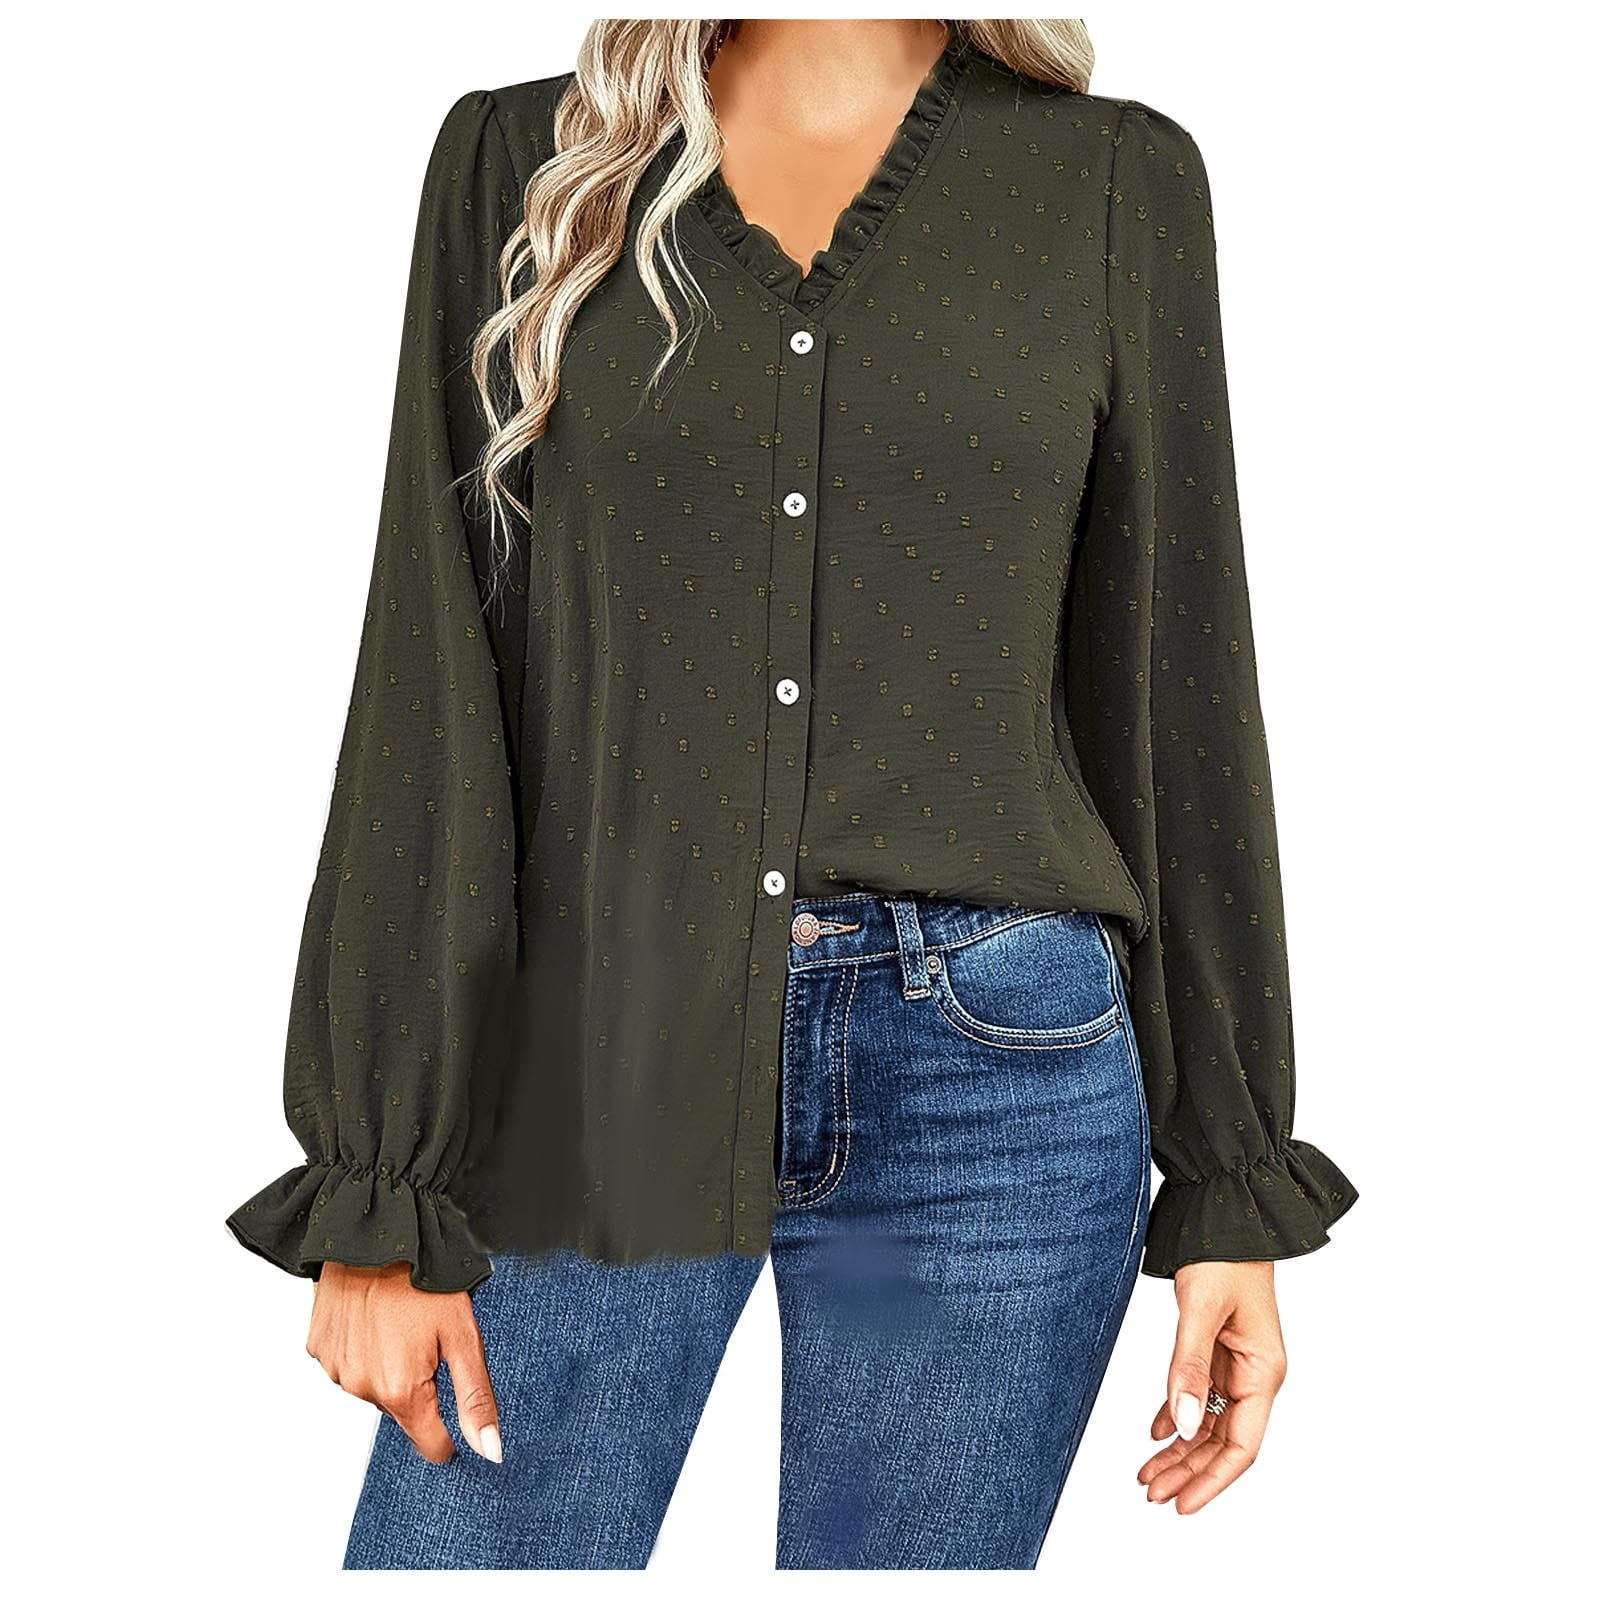 Long Shirts Women Trendy Women's Summer V Neck Leisure Long Sleeve Solid Tops Blusas Casuales Mujer - Walmart.com